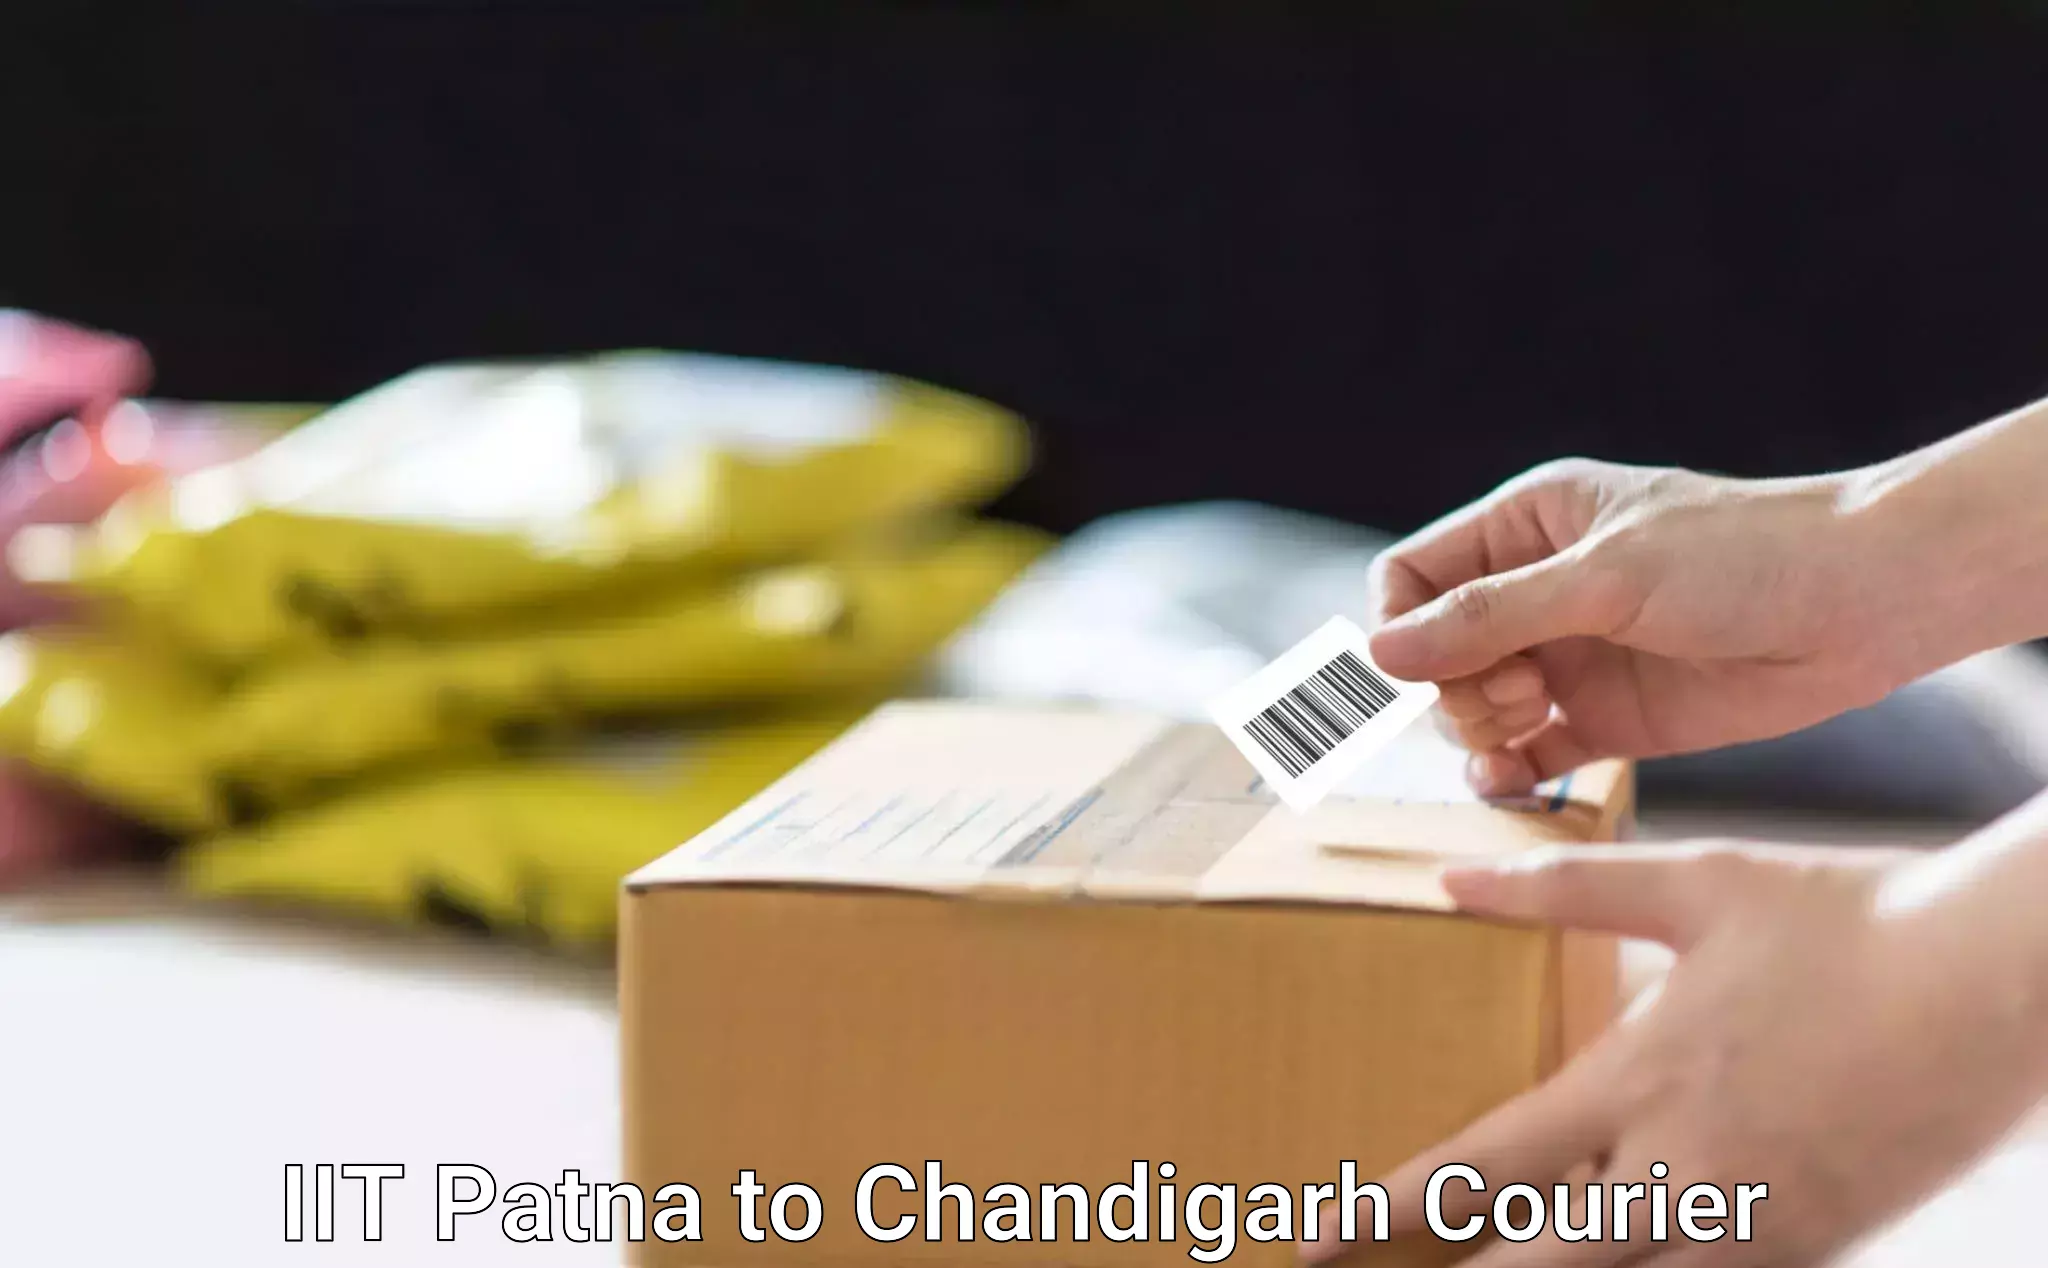 Quality moving and storage in IIT Patna to Chandigarh